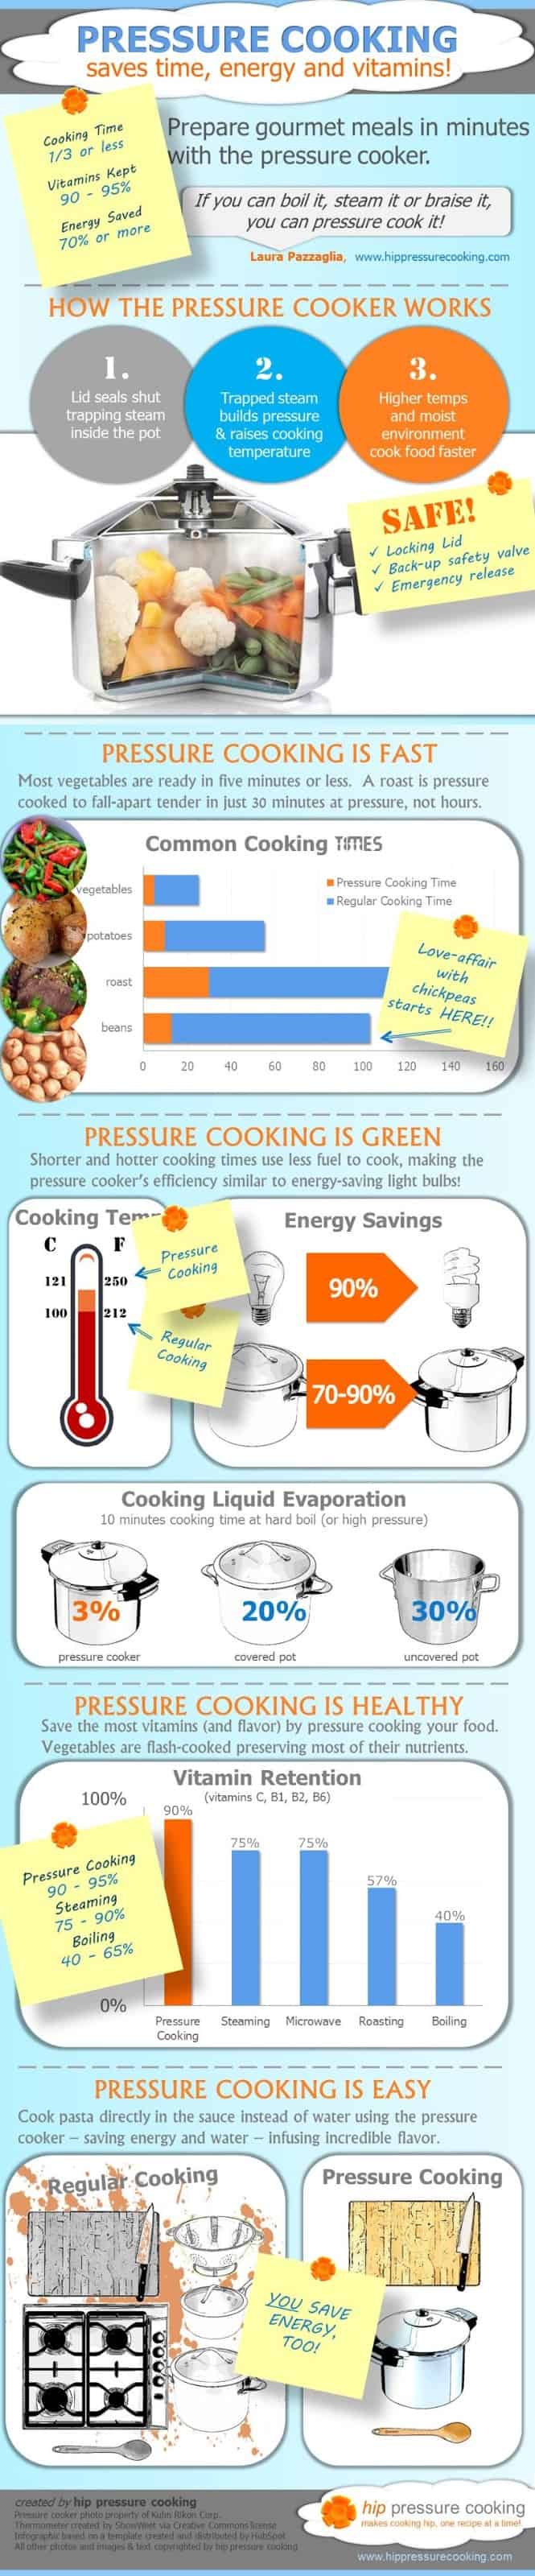 Why use a pressure cooker?&nbsp;With so many small kitchen appliances available, people often ask what the benefits are to using an Instant Pot multi-cooker. This infographic explains the benefits of cooking in a multi-cooker (Instant Pot) or electric pressure cooker.